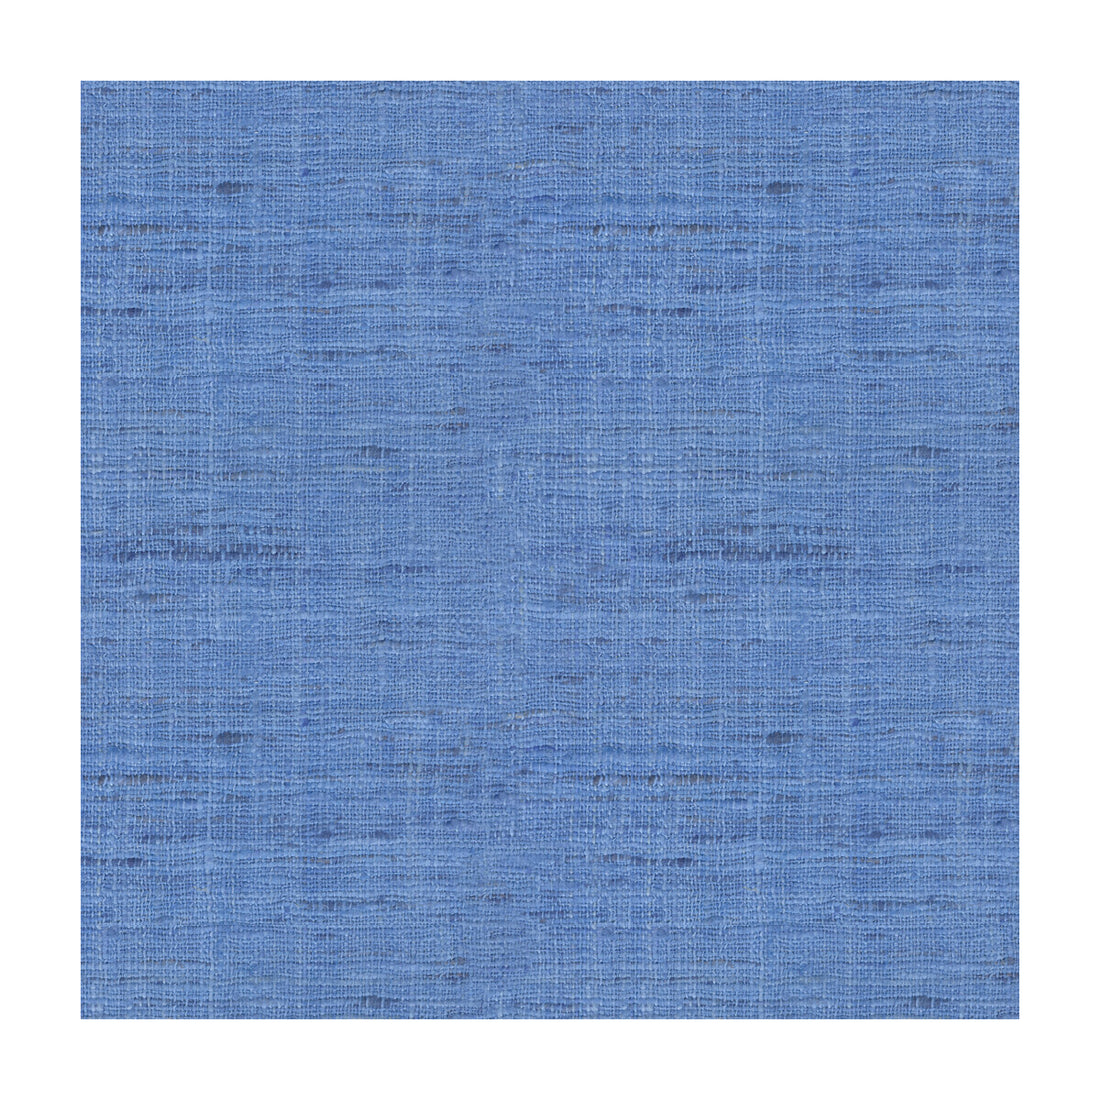 Sonoma fabric in cornflower color - pattern GWF-3109.510.0 - by Lee Jofa Modern in the Kelly Wearstler II collection